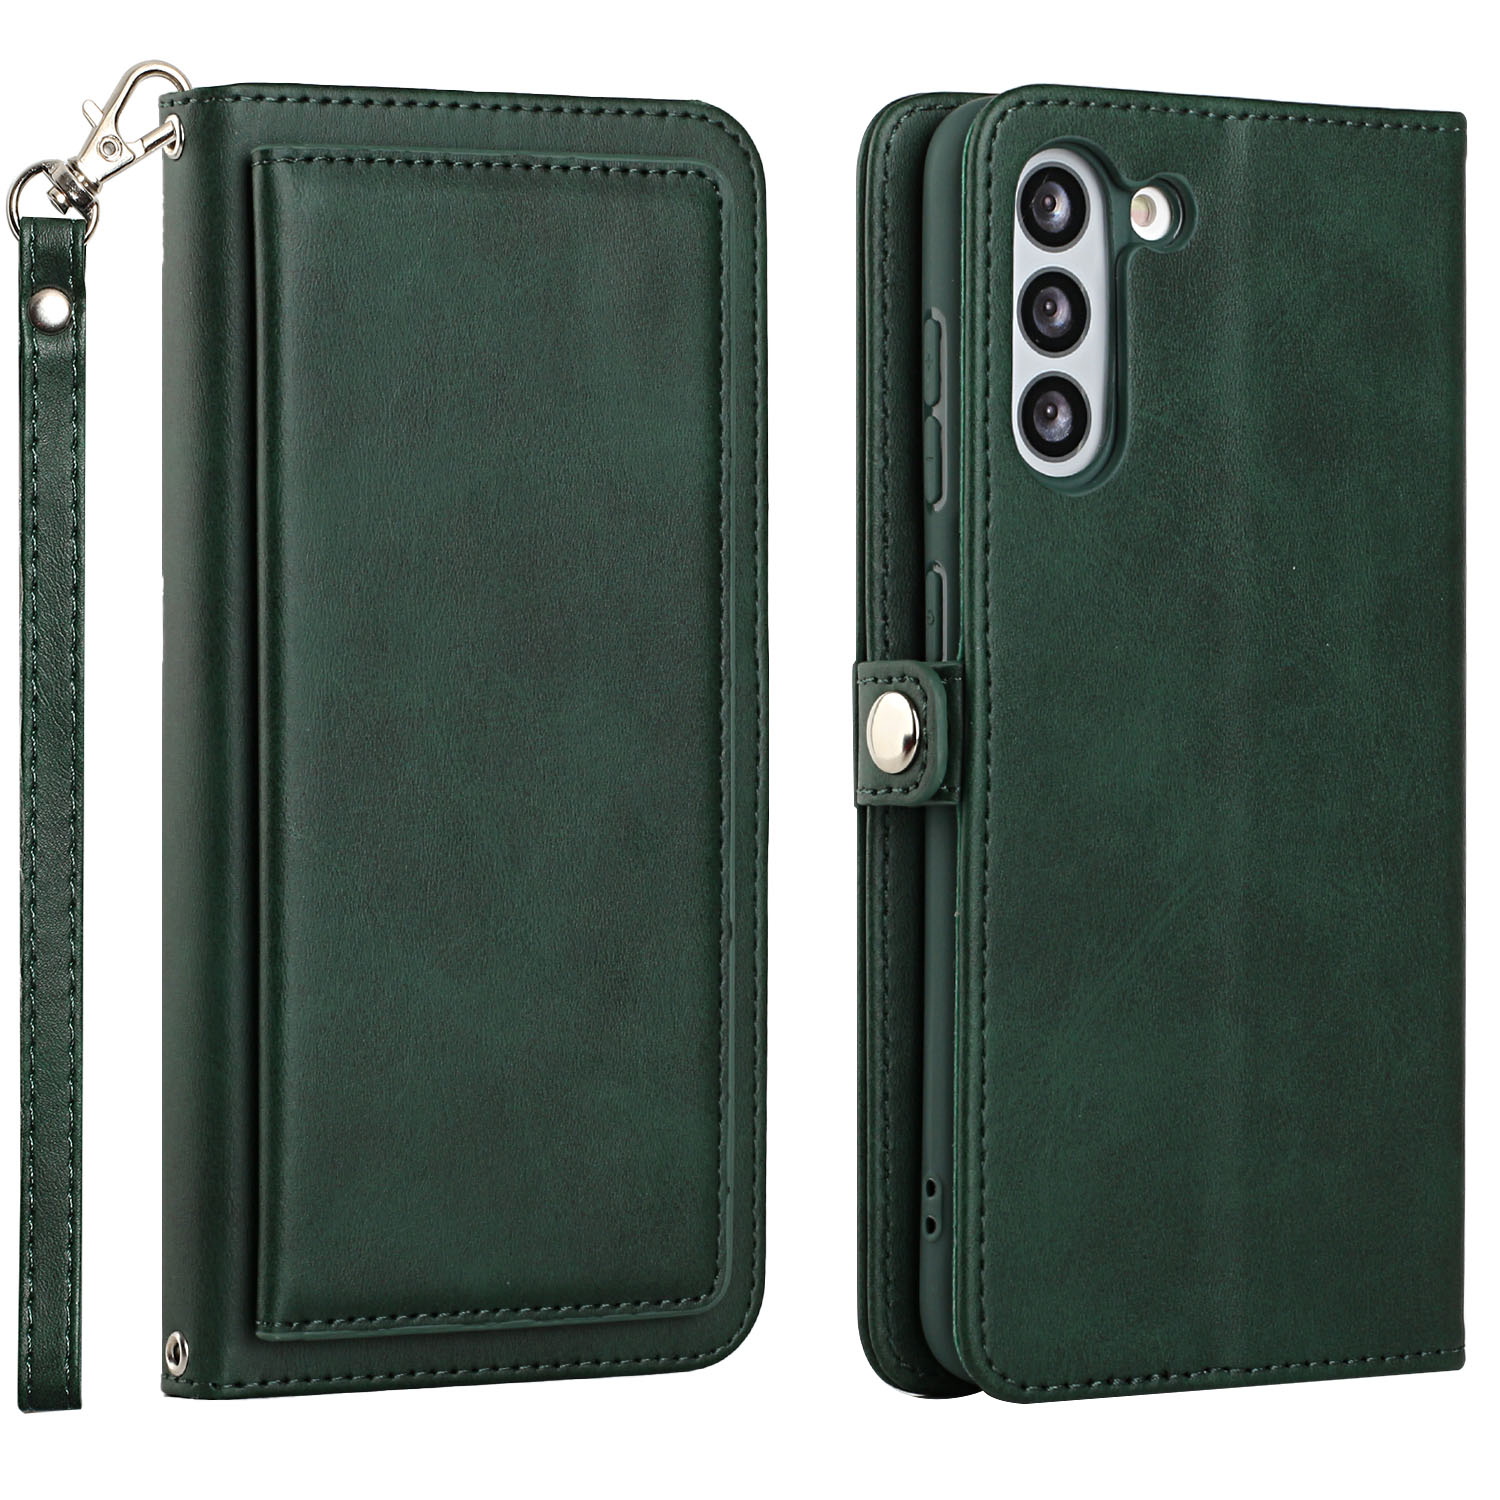 Premium PU Leather Folio WALLET Front Cover Case for Galaxy S21 FE (Green)